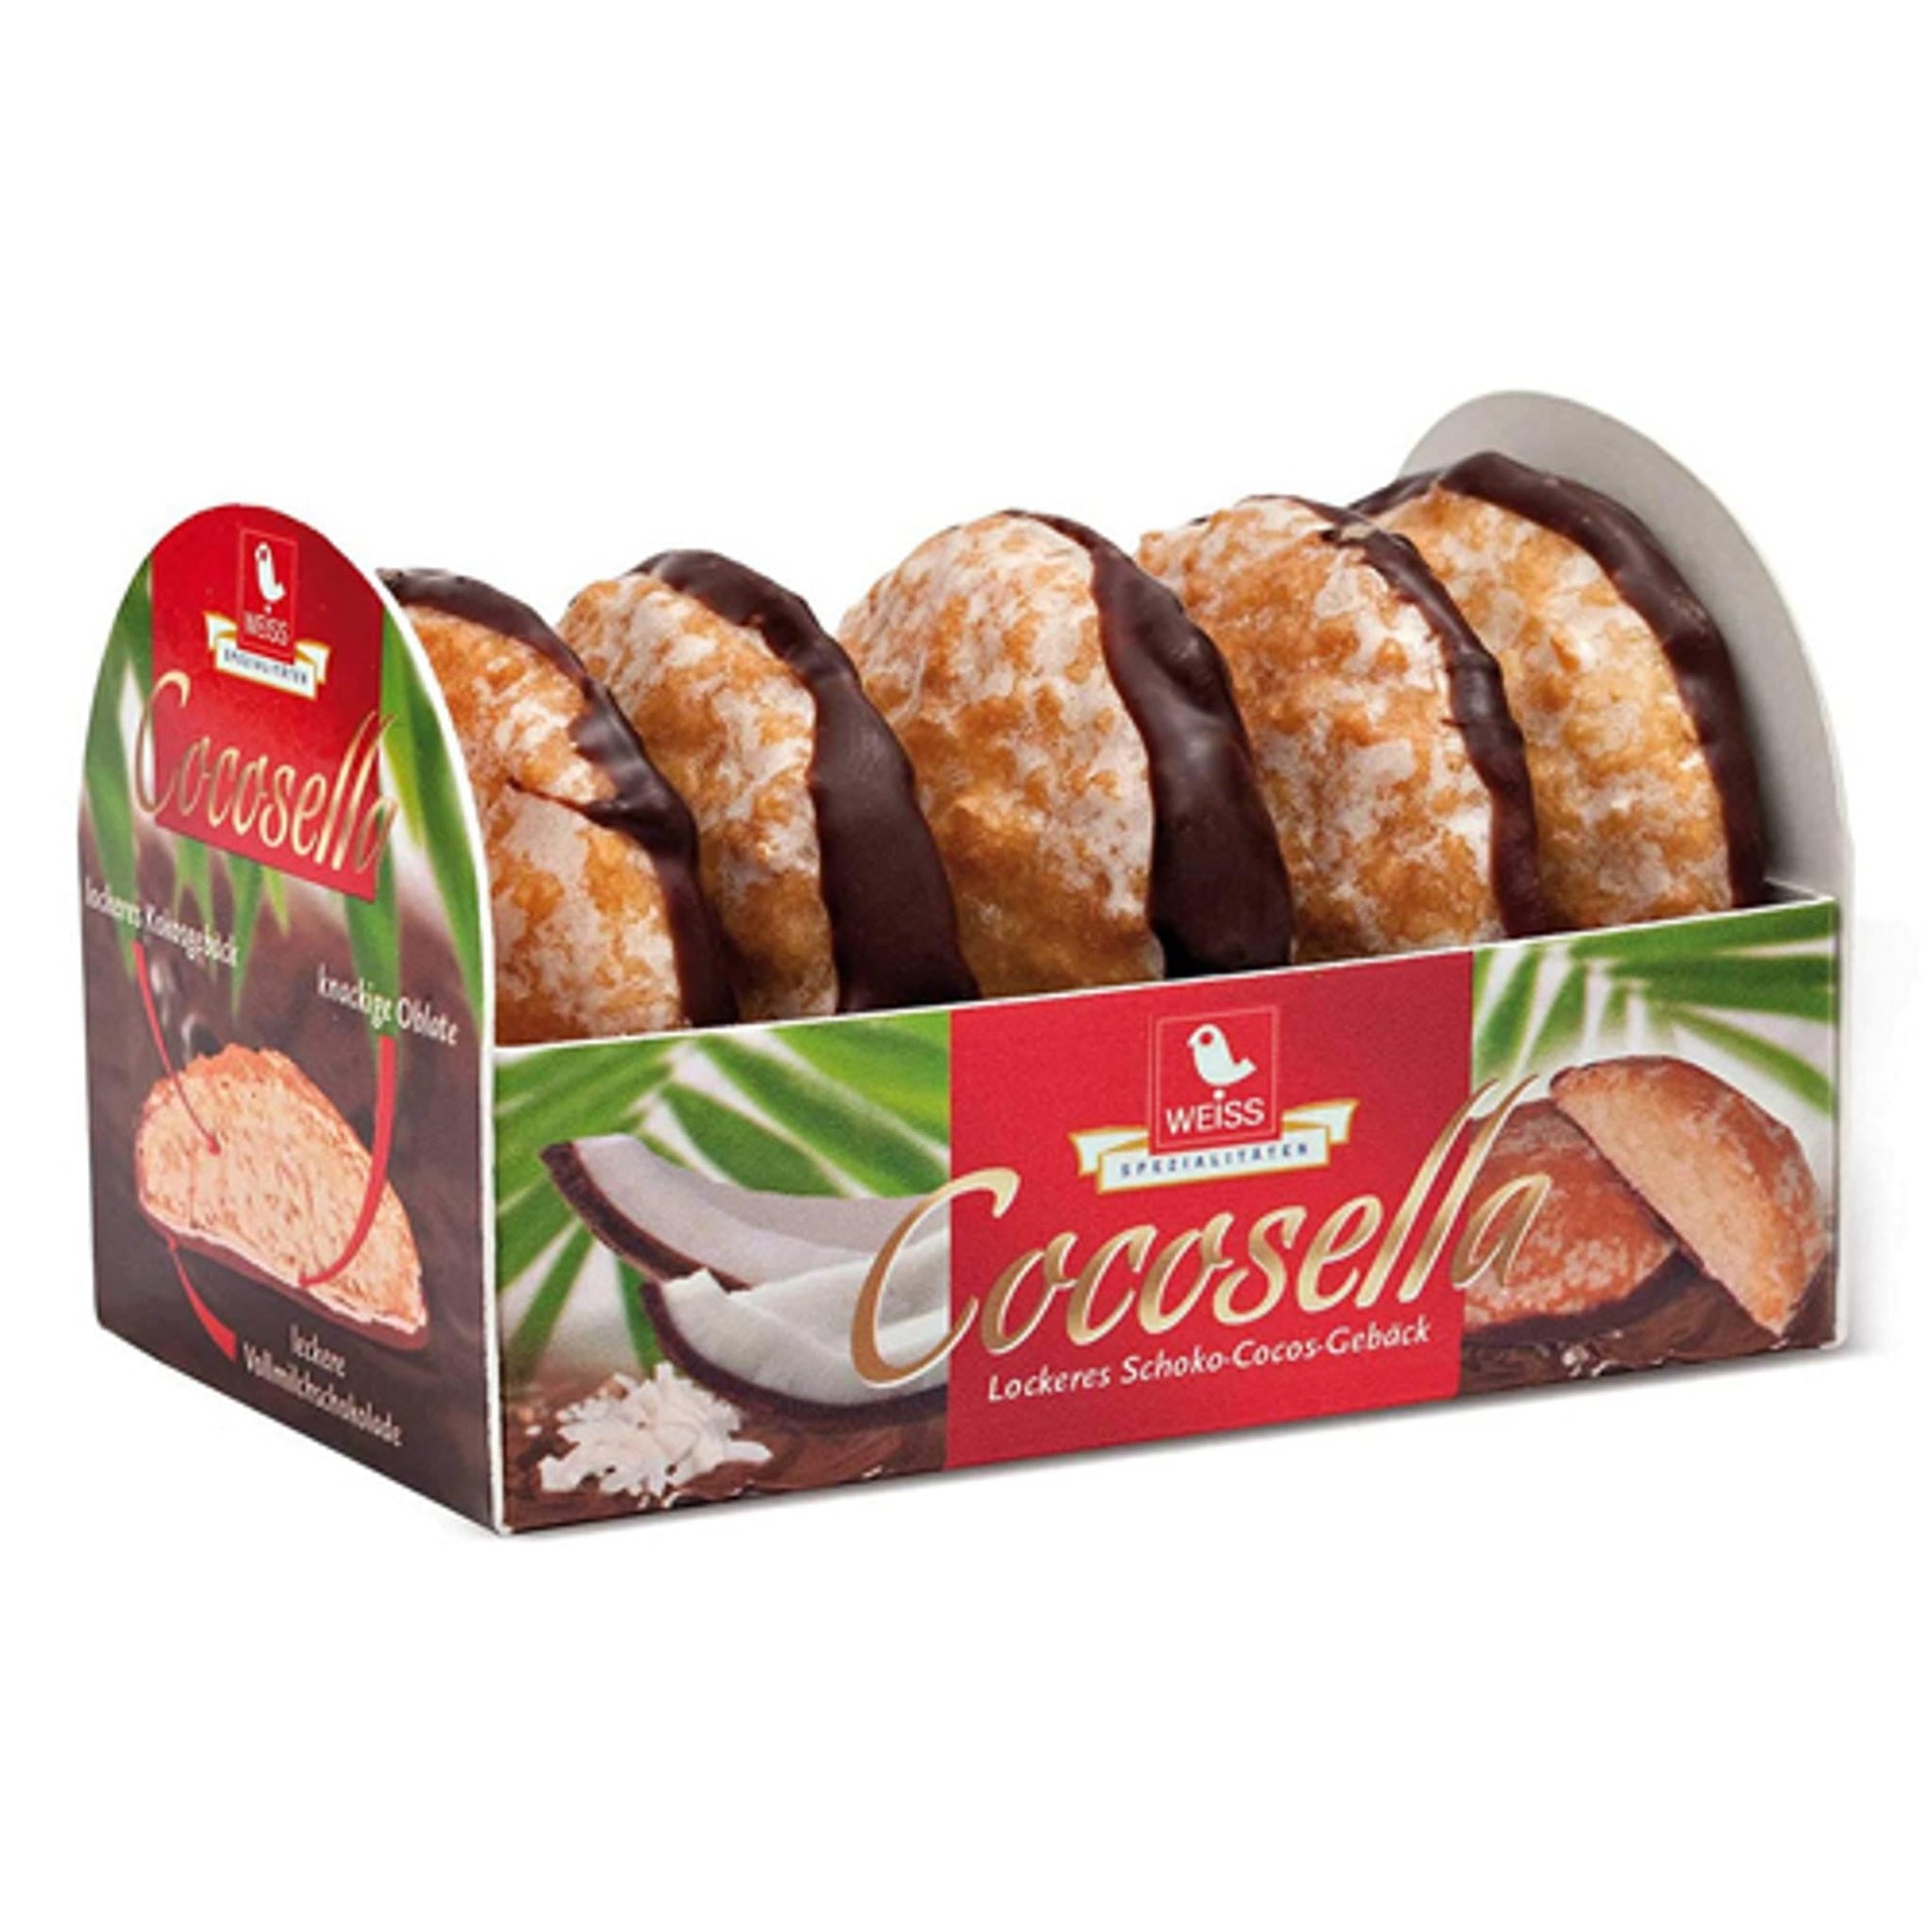 Weiss Cocosella Coconut Cookies